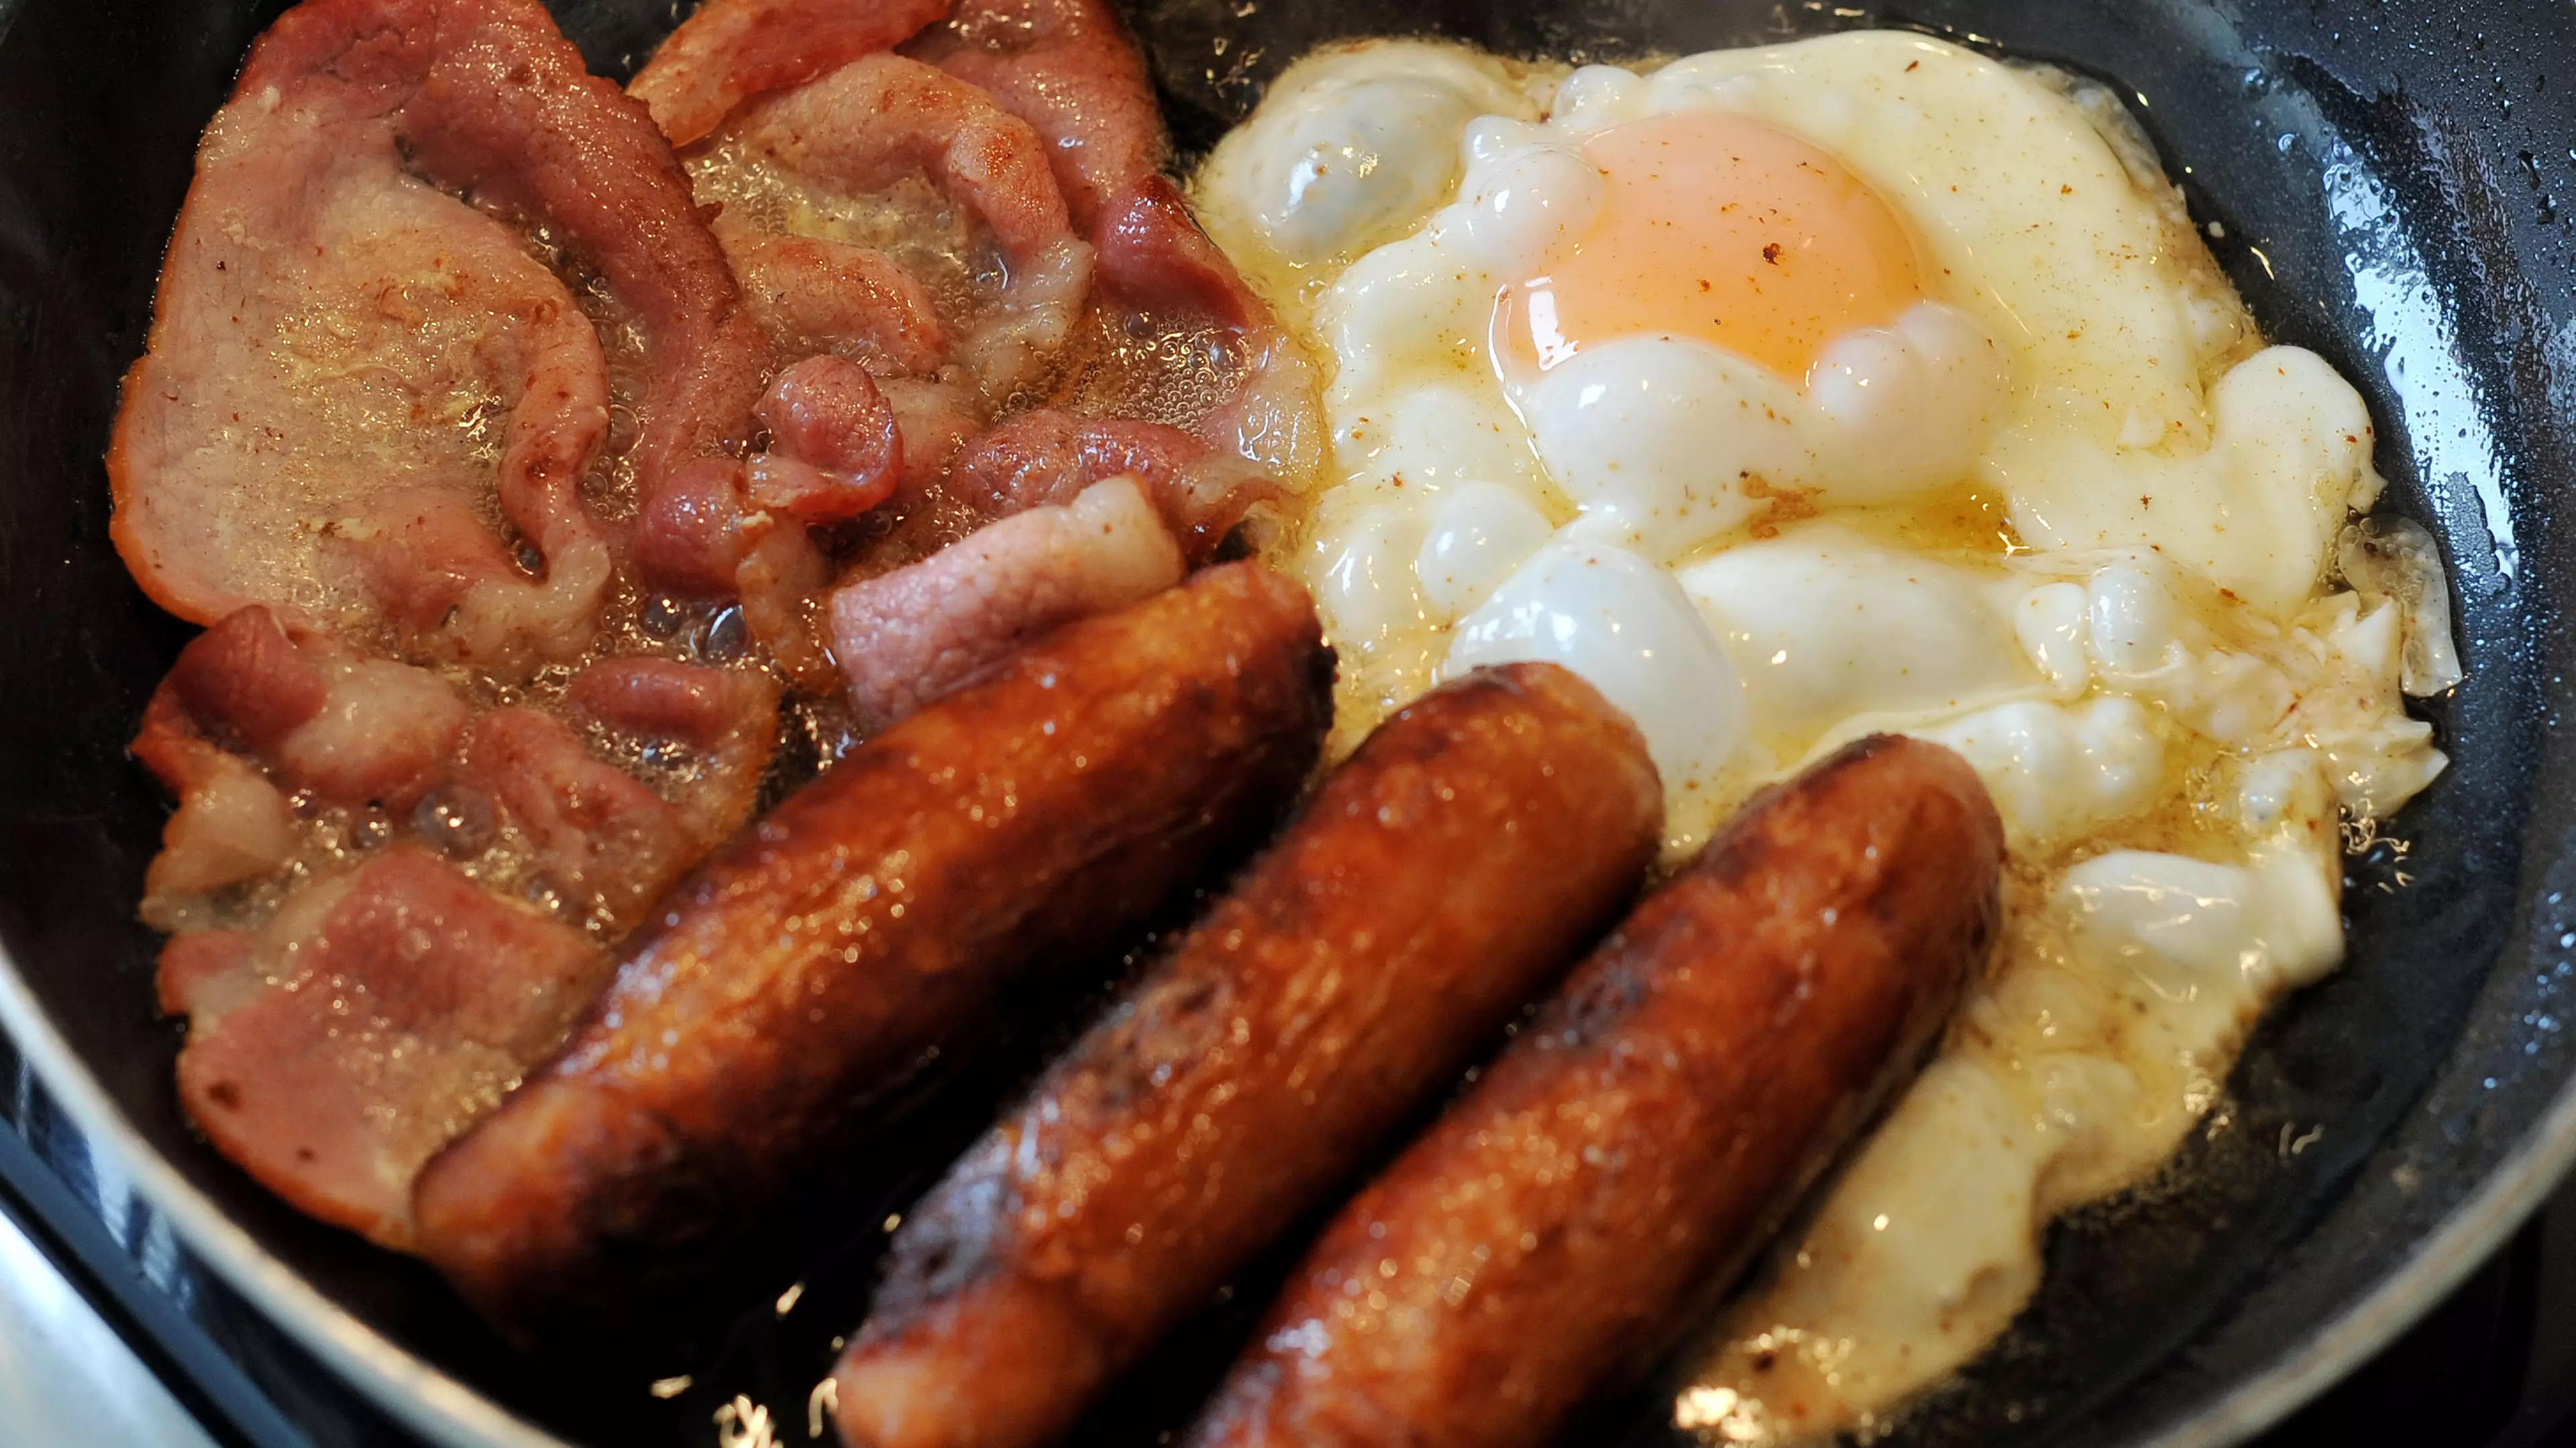 The Full English Breakfast Could Be On Its Way Out, Study Finds